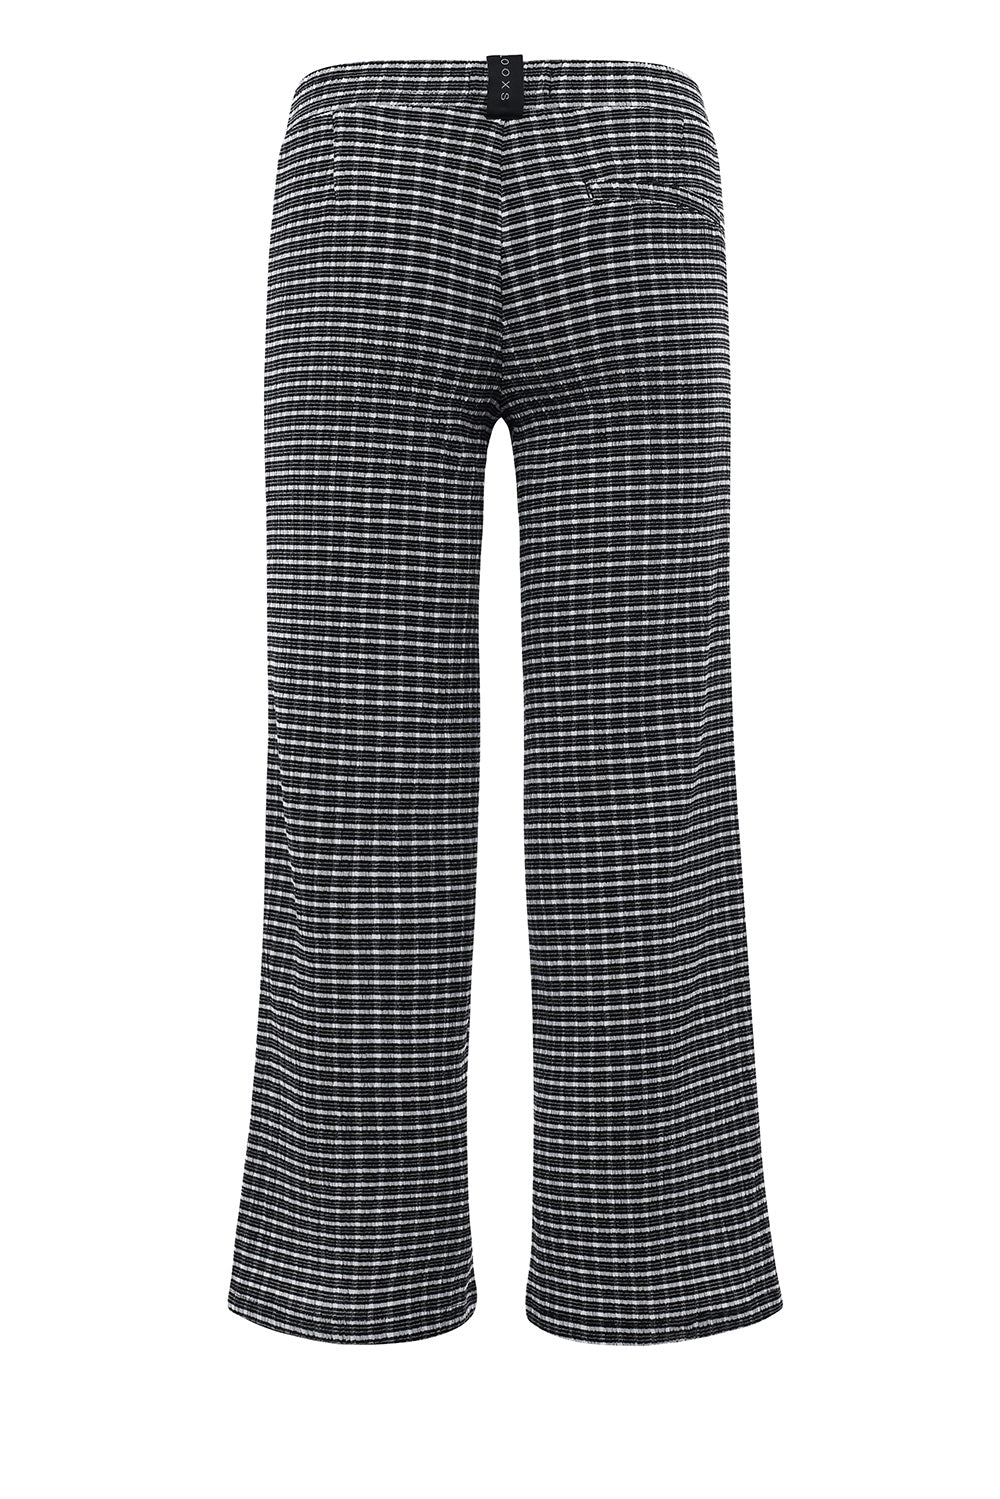 LOOXS 10sixteen Check Crinkle Wide Pants